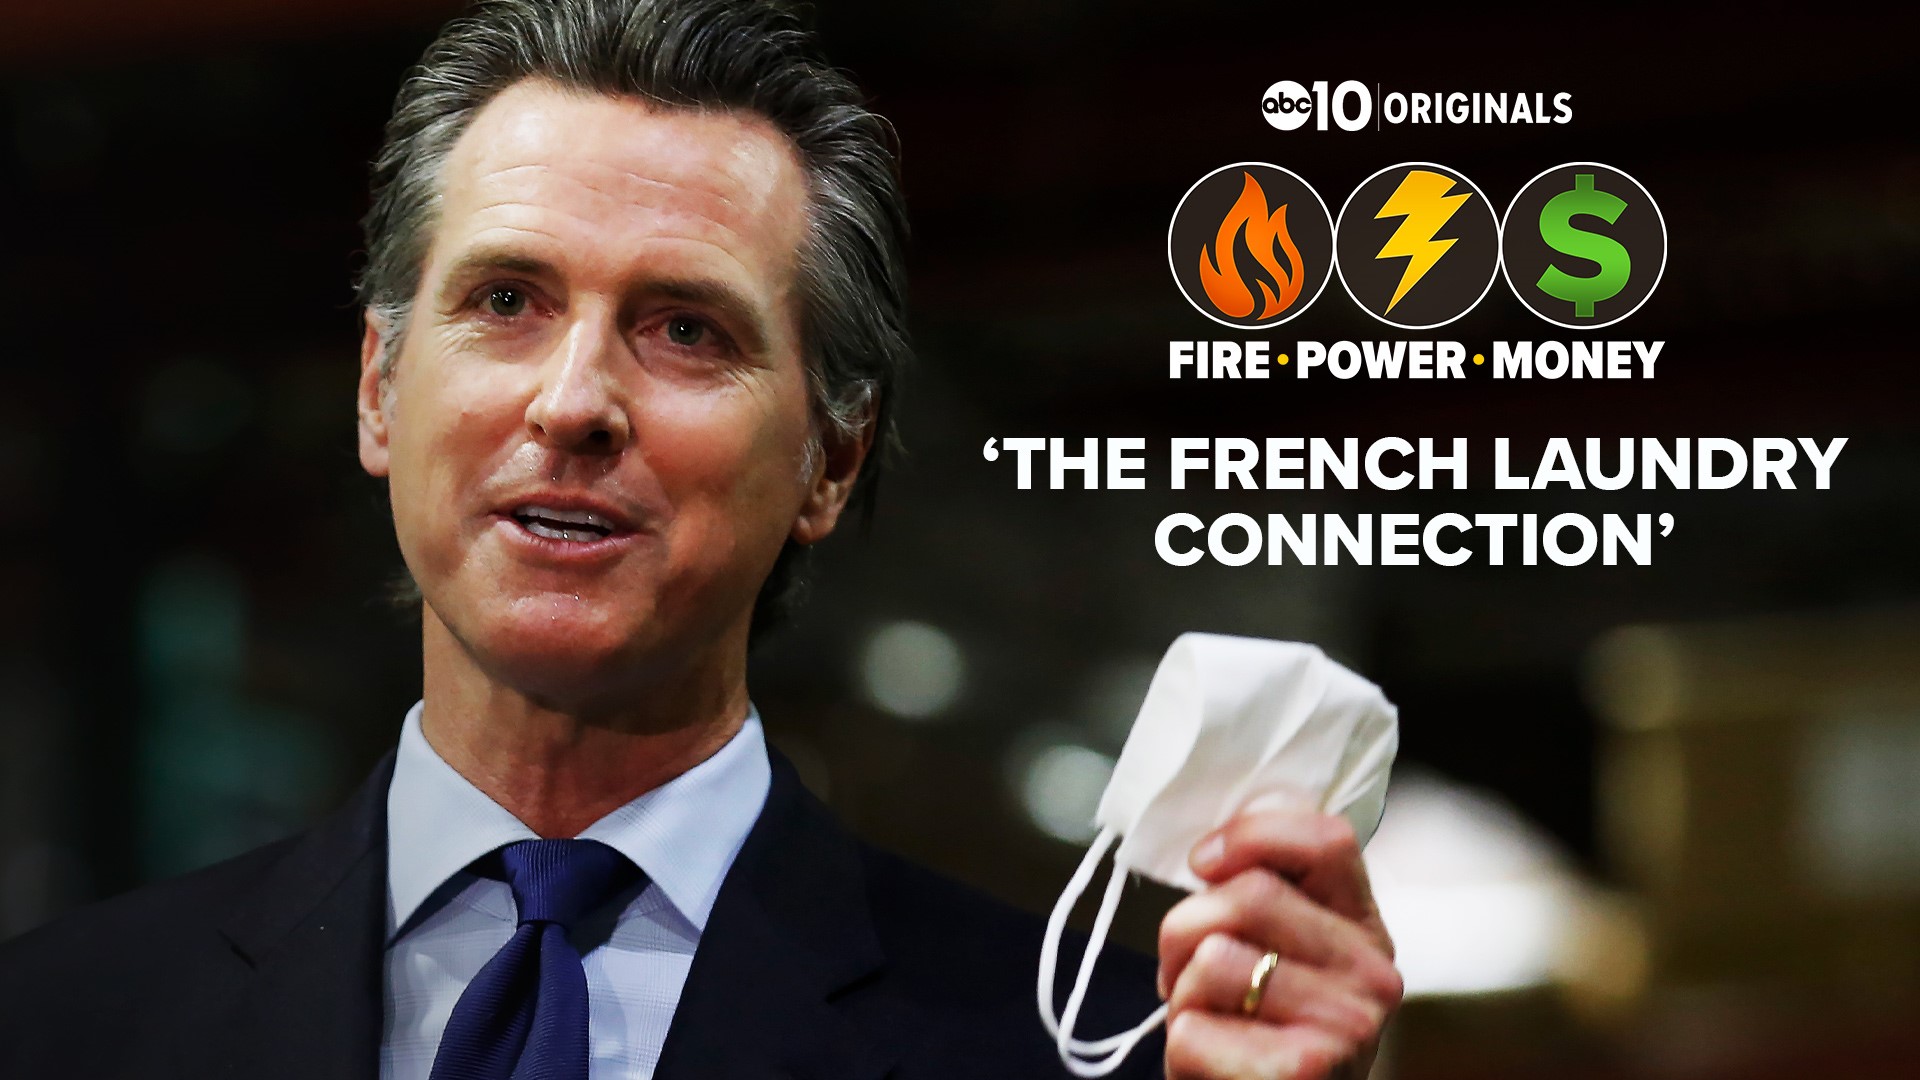 ABC10 investigation: Gov. Newsom brokered a bankruptcy plan that prioritized PG&E, French Laundry friend’s clients over PG&E fire victims.